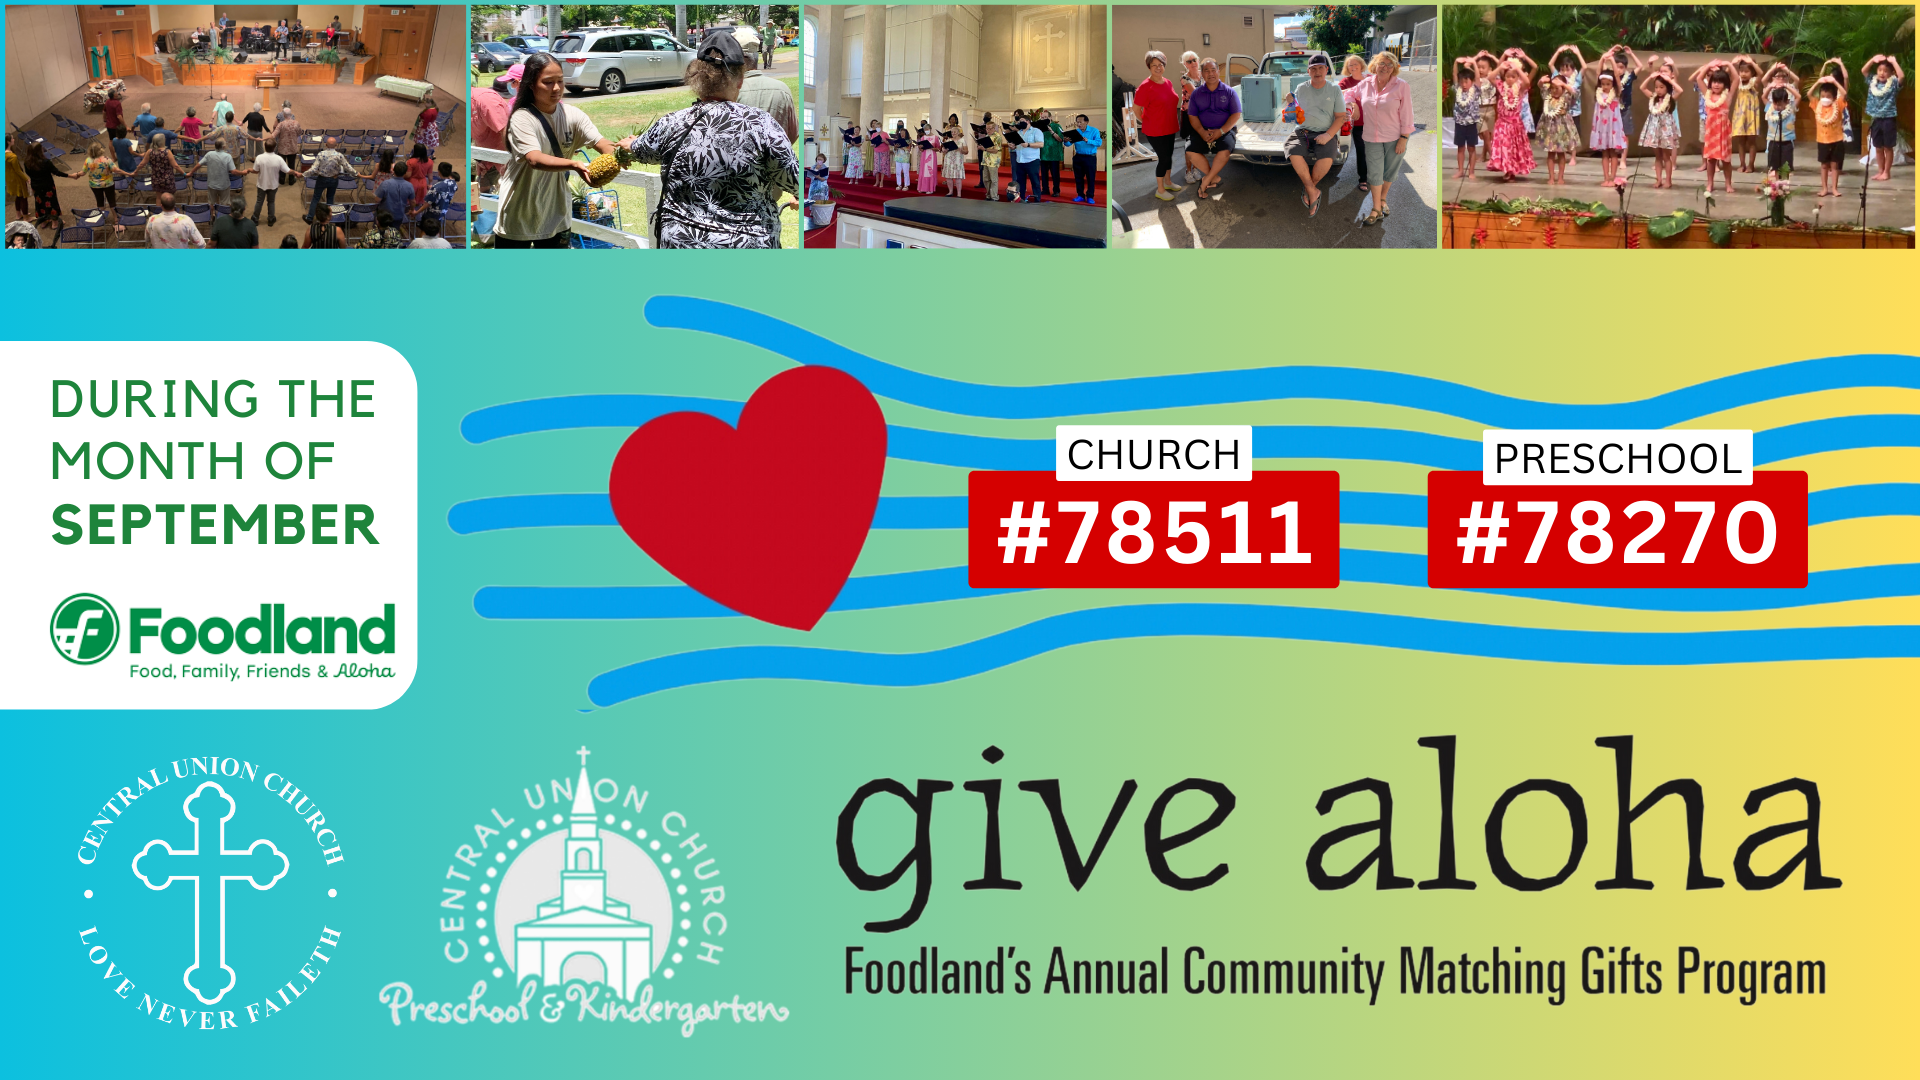 large graphic with five photos at top give aloha foodland logo with church and preschool codes and logos